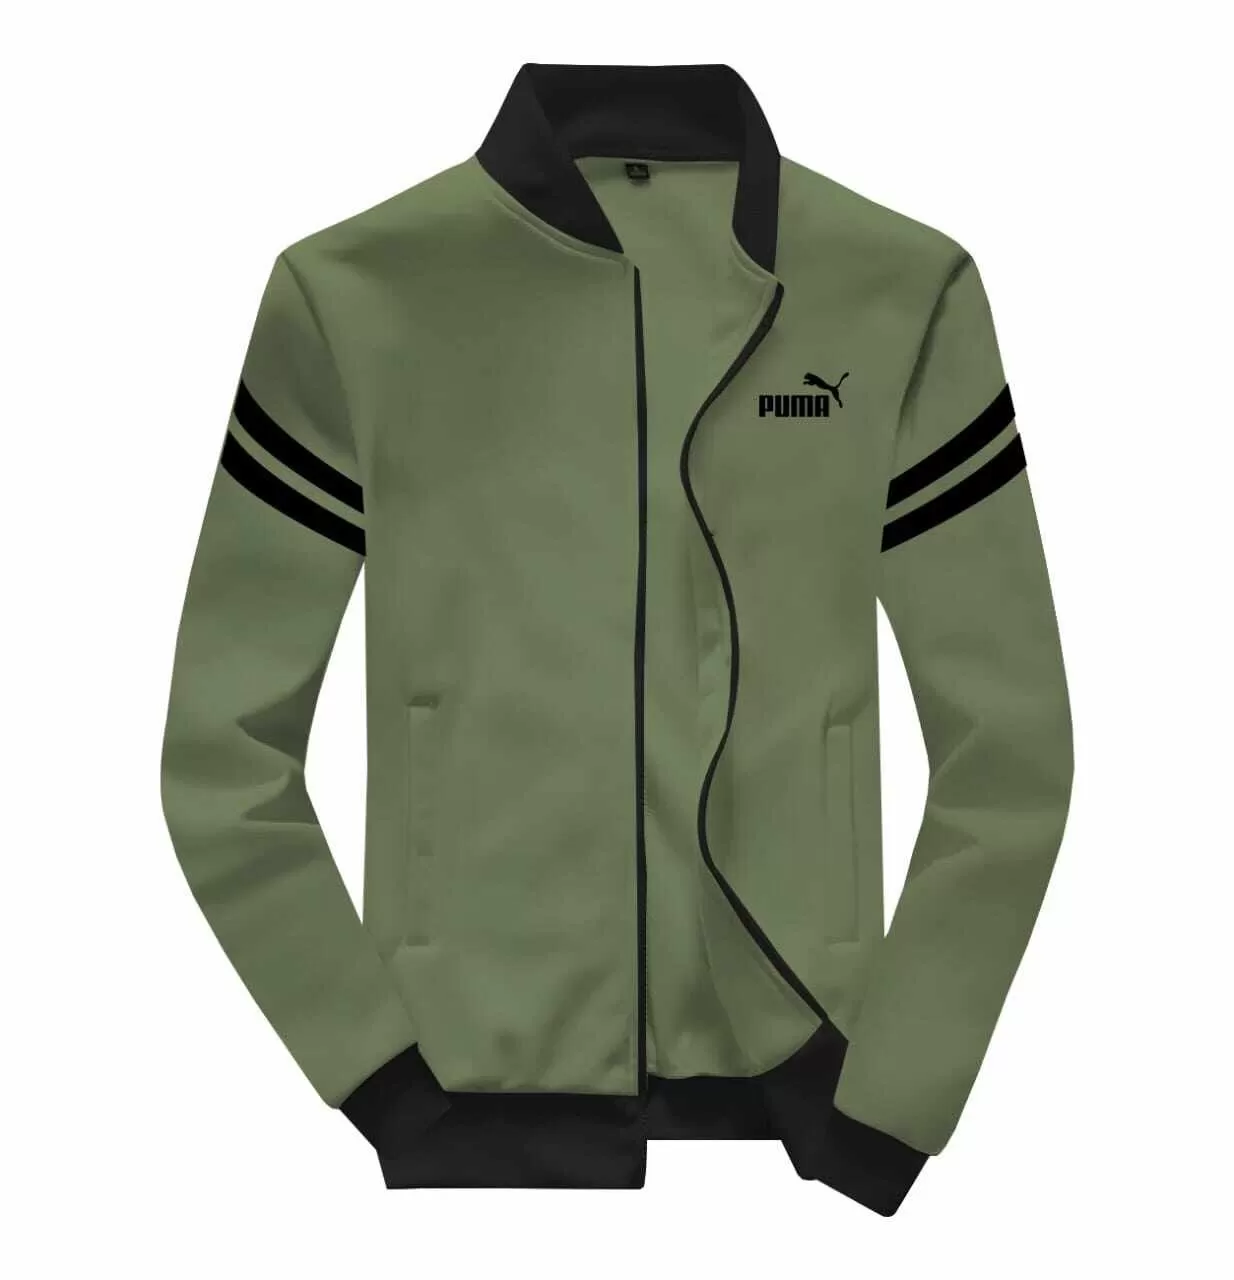 Baseball Jacket With Sleeves Strips And Front Logo